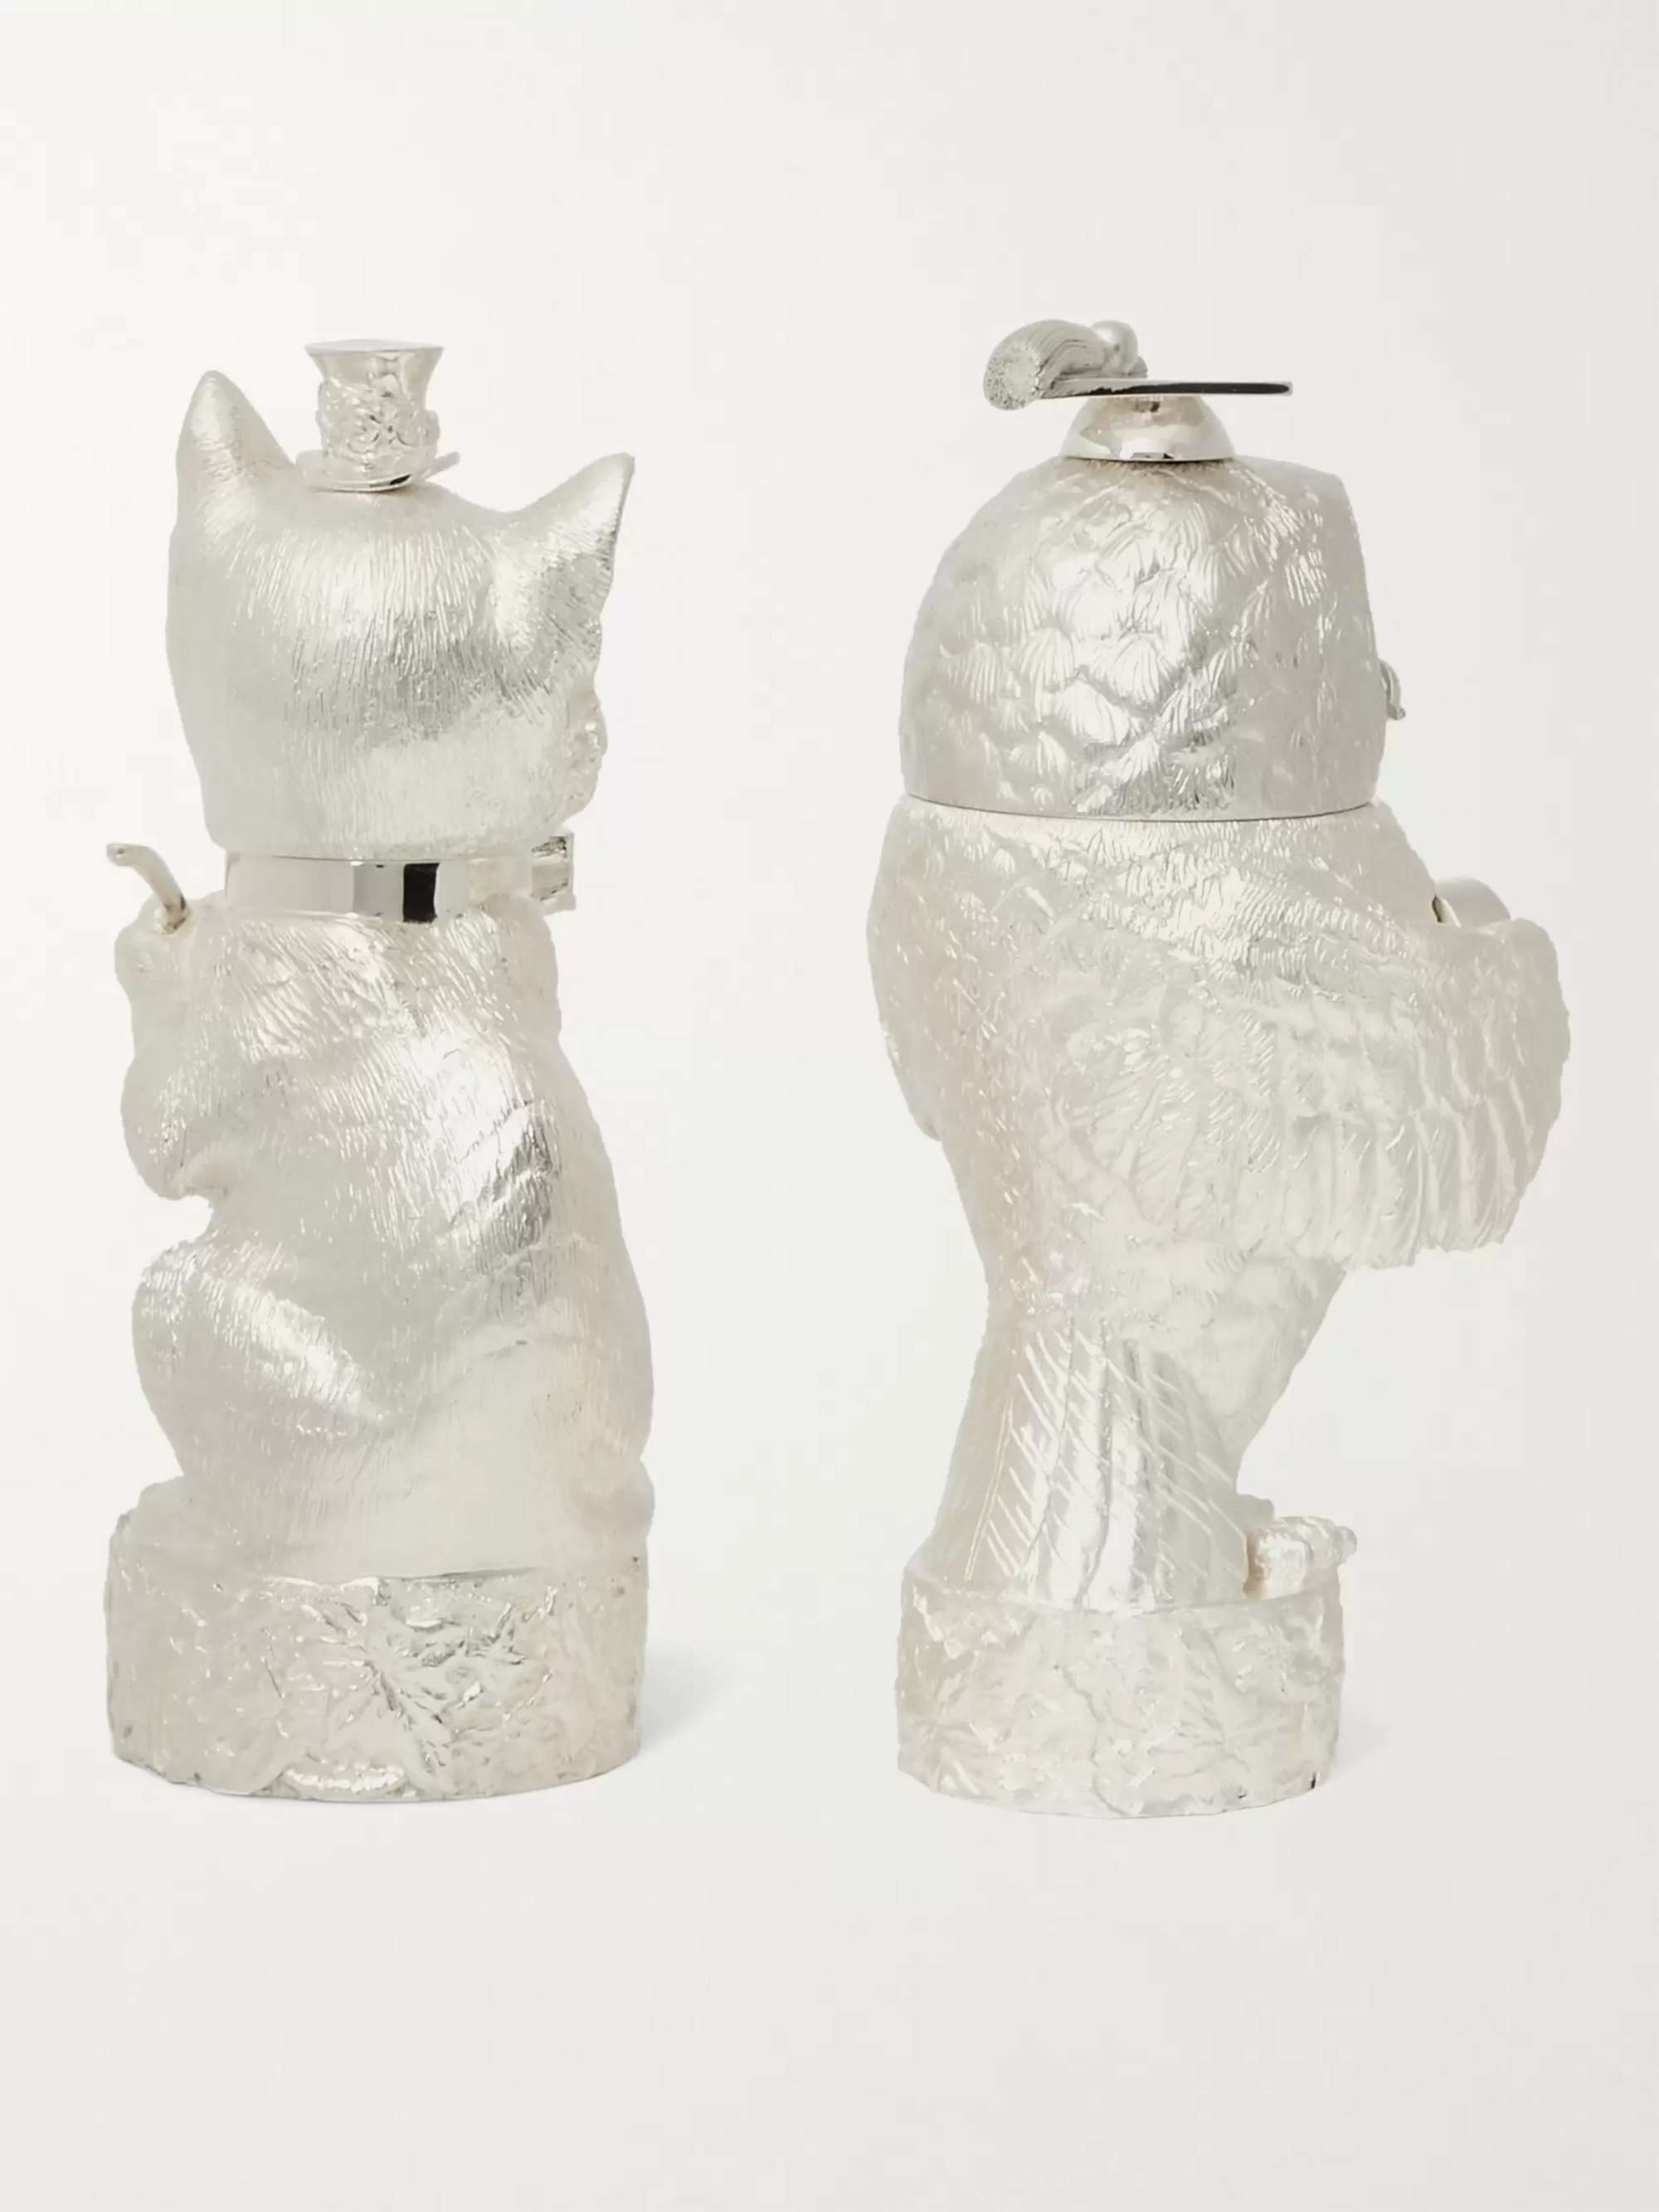 ASPREY Owl & Pussycat Sterling Silver Salt and Pepper Shakers